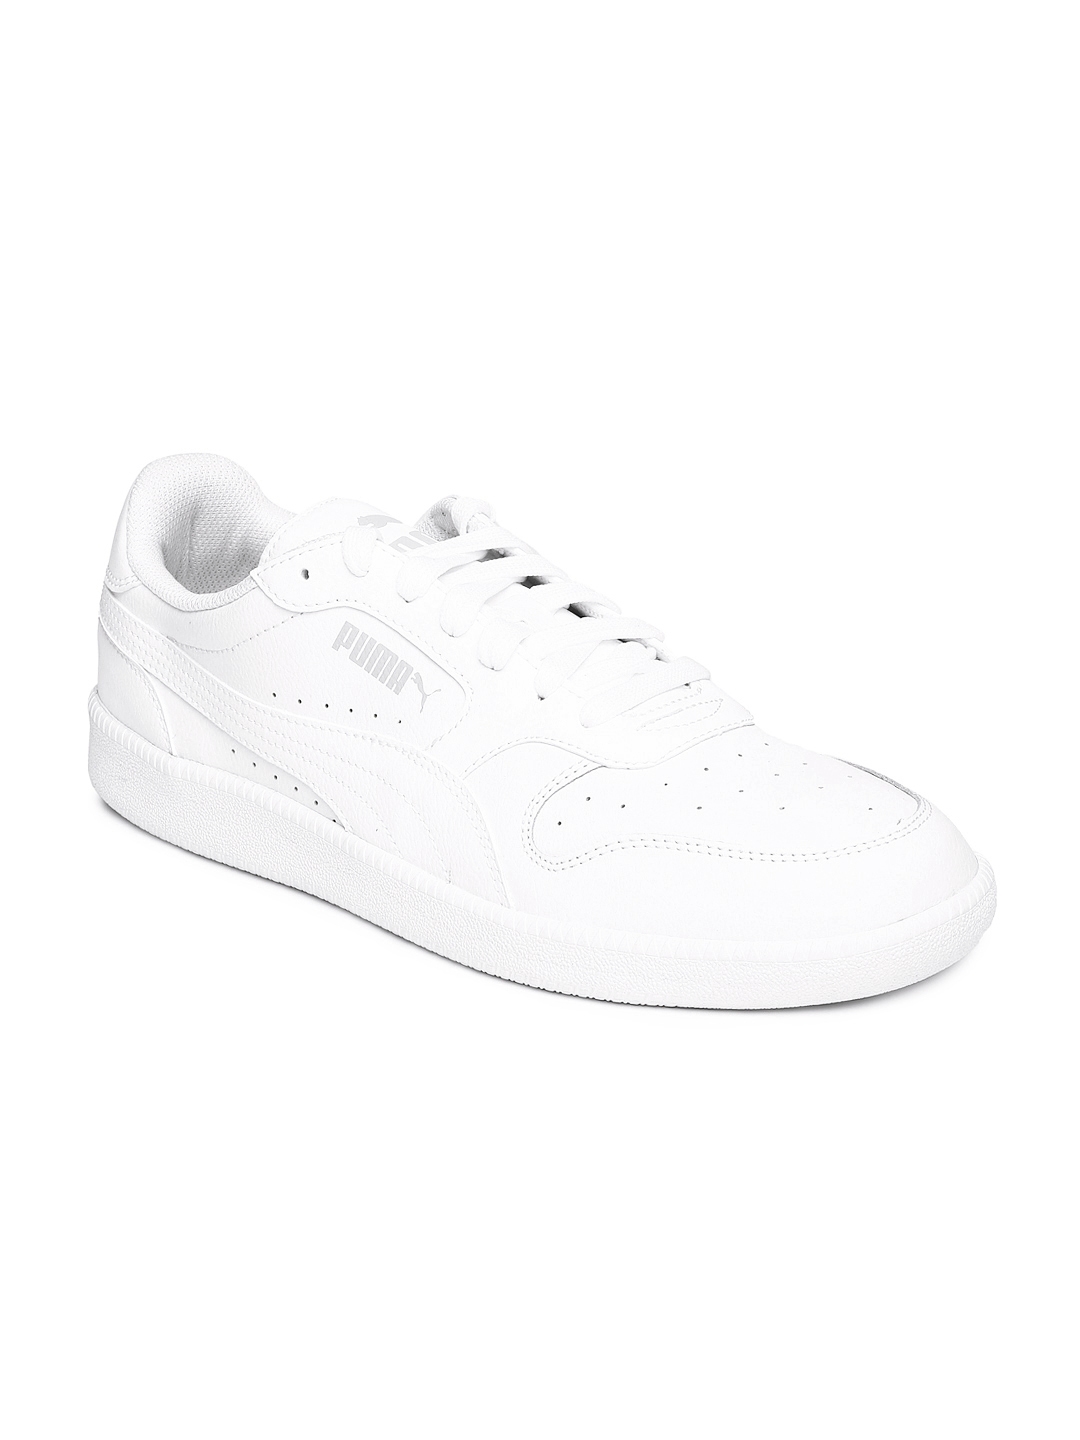 Buy PUMA Men White Icra Trainer L Casual Shoes - Casual for Men | Myntra